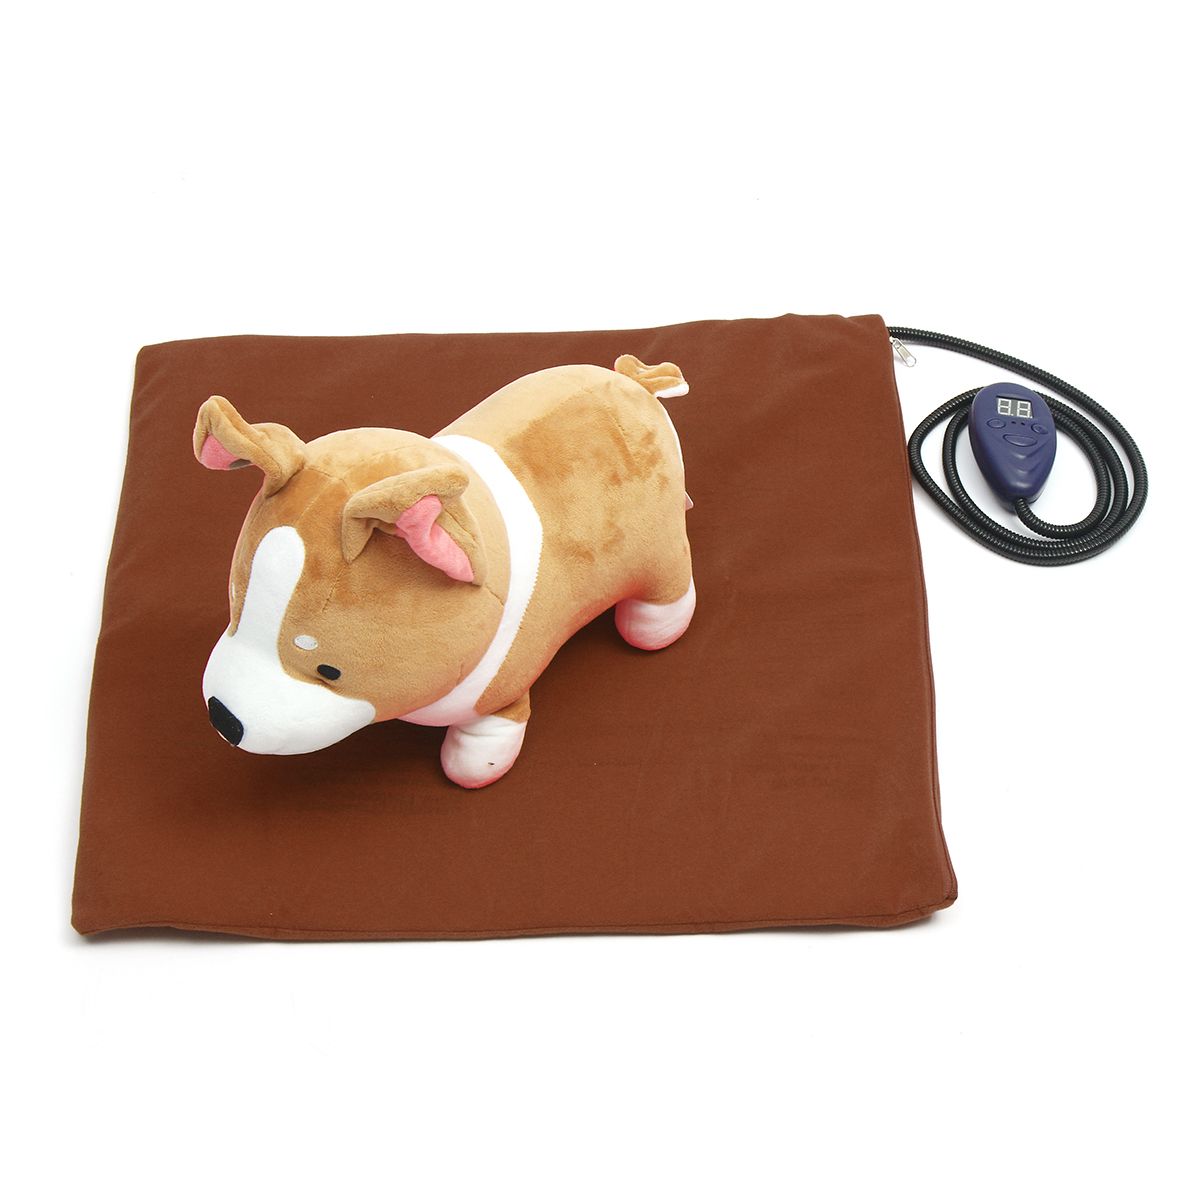 50x50cm-Electric-Heating-Heater-Heated-Bed-Mat-Pad-Blanket-Without-Cable-For-Pet-Dog-Cat-Rabbit-1317919